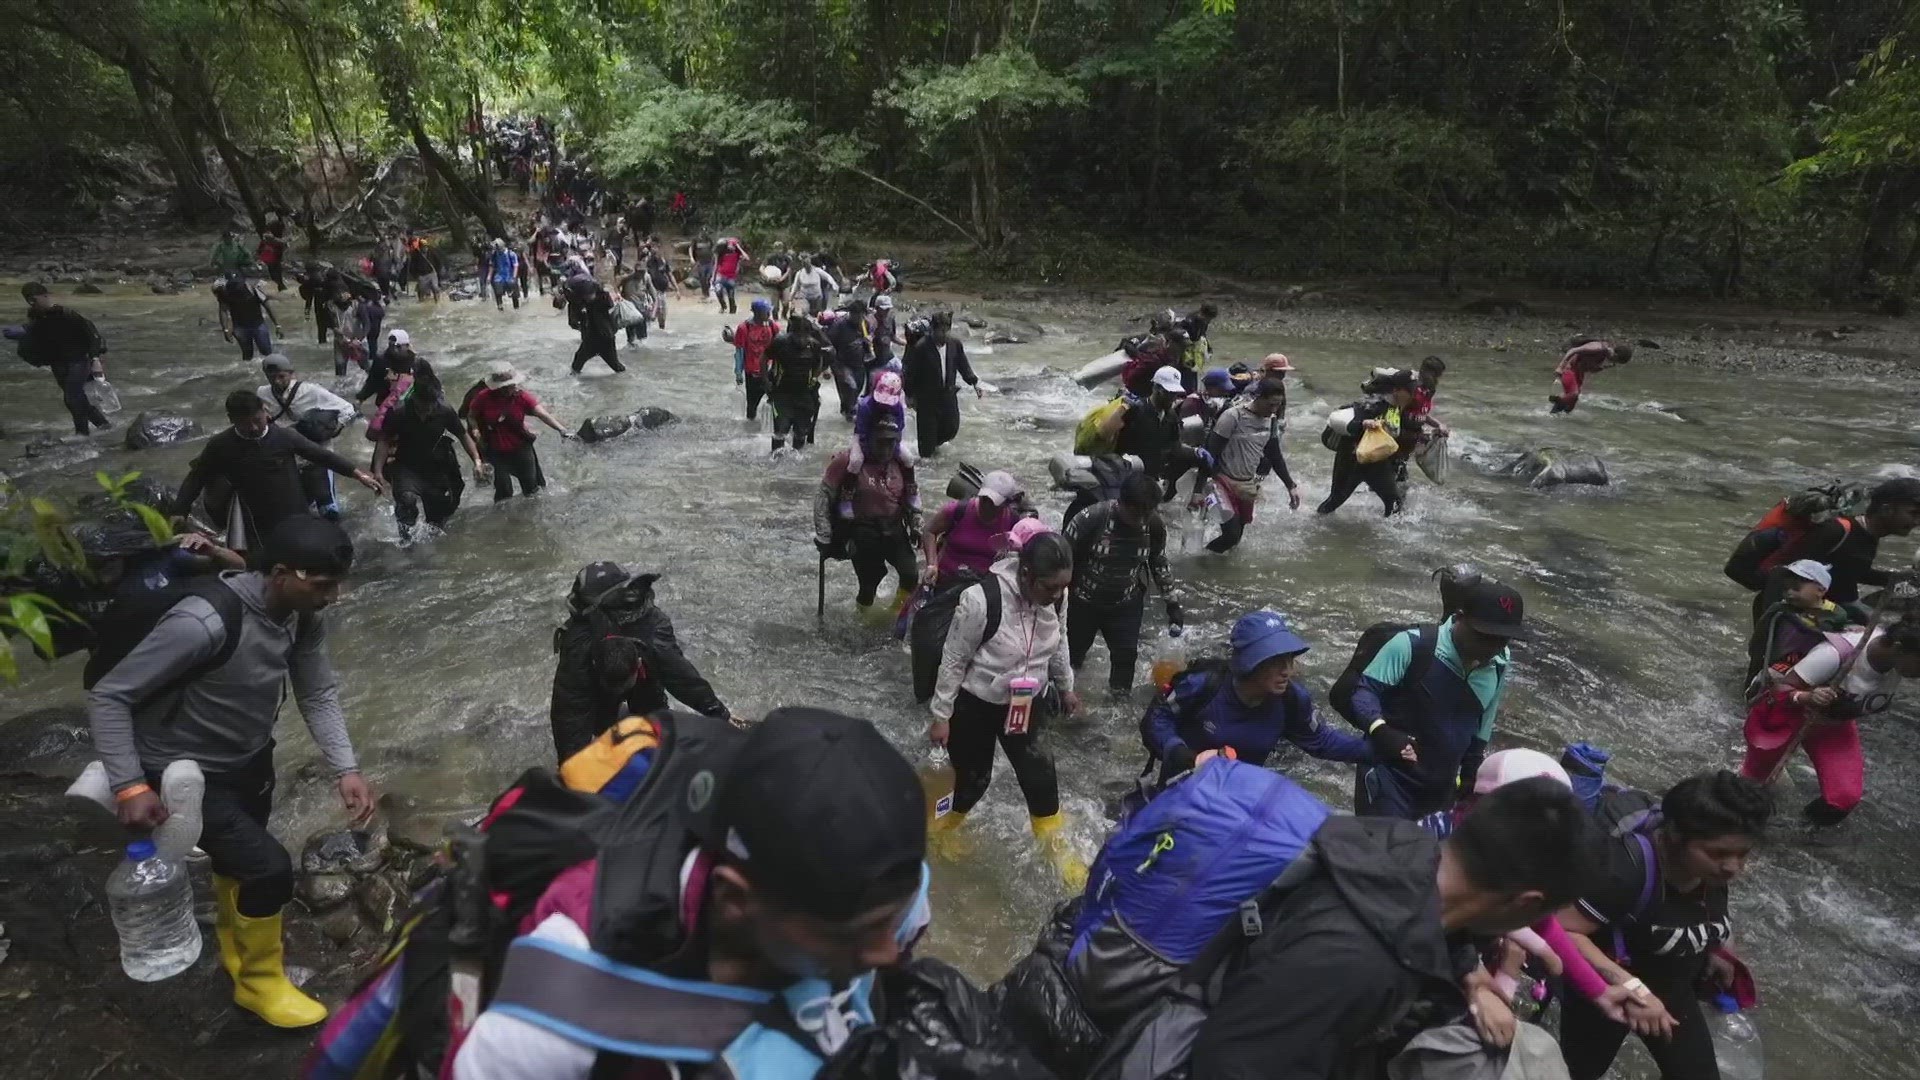 Officials say they'll launch a 60-day campaign to stop illegal migration through the Darien Gap, where the flow of migrants has multiplied this year.